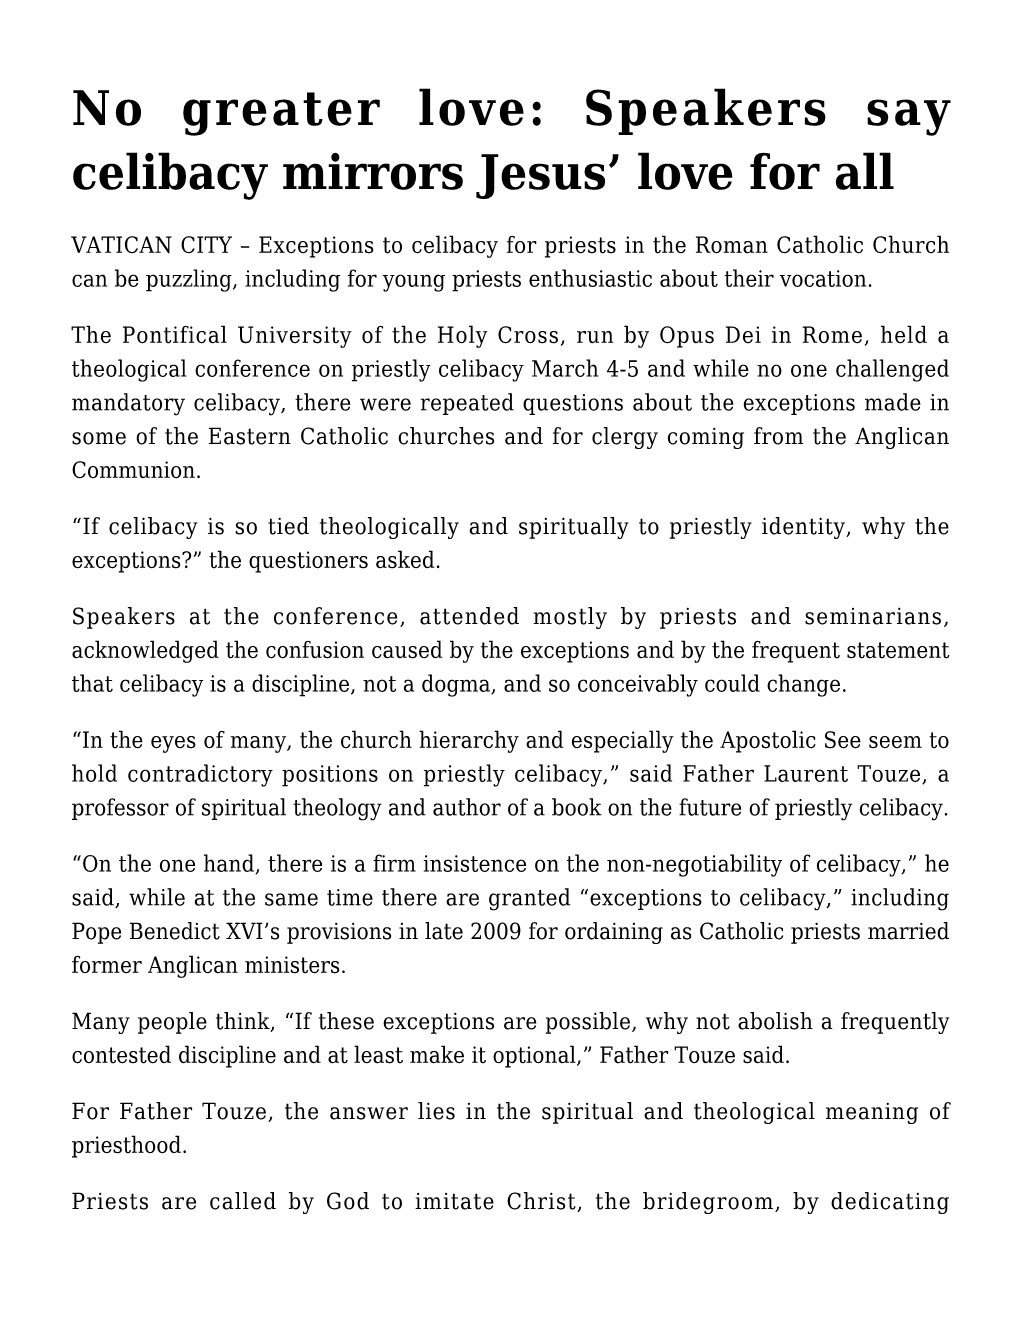 No Greater Love: Speakers Say Celibacy Mirrors Jesus' Love For